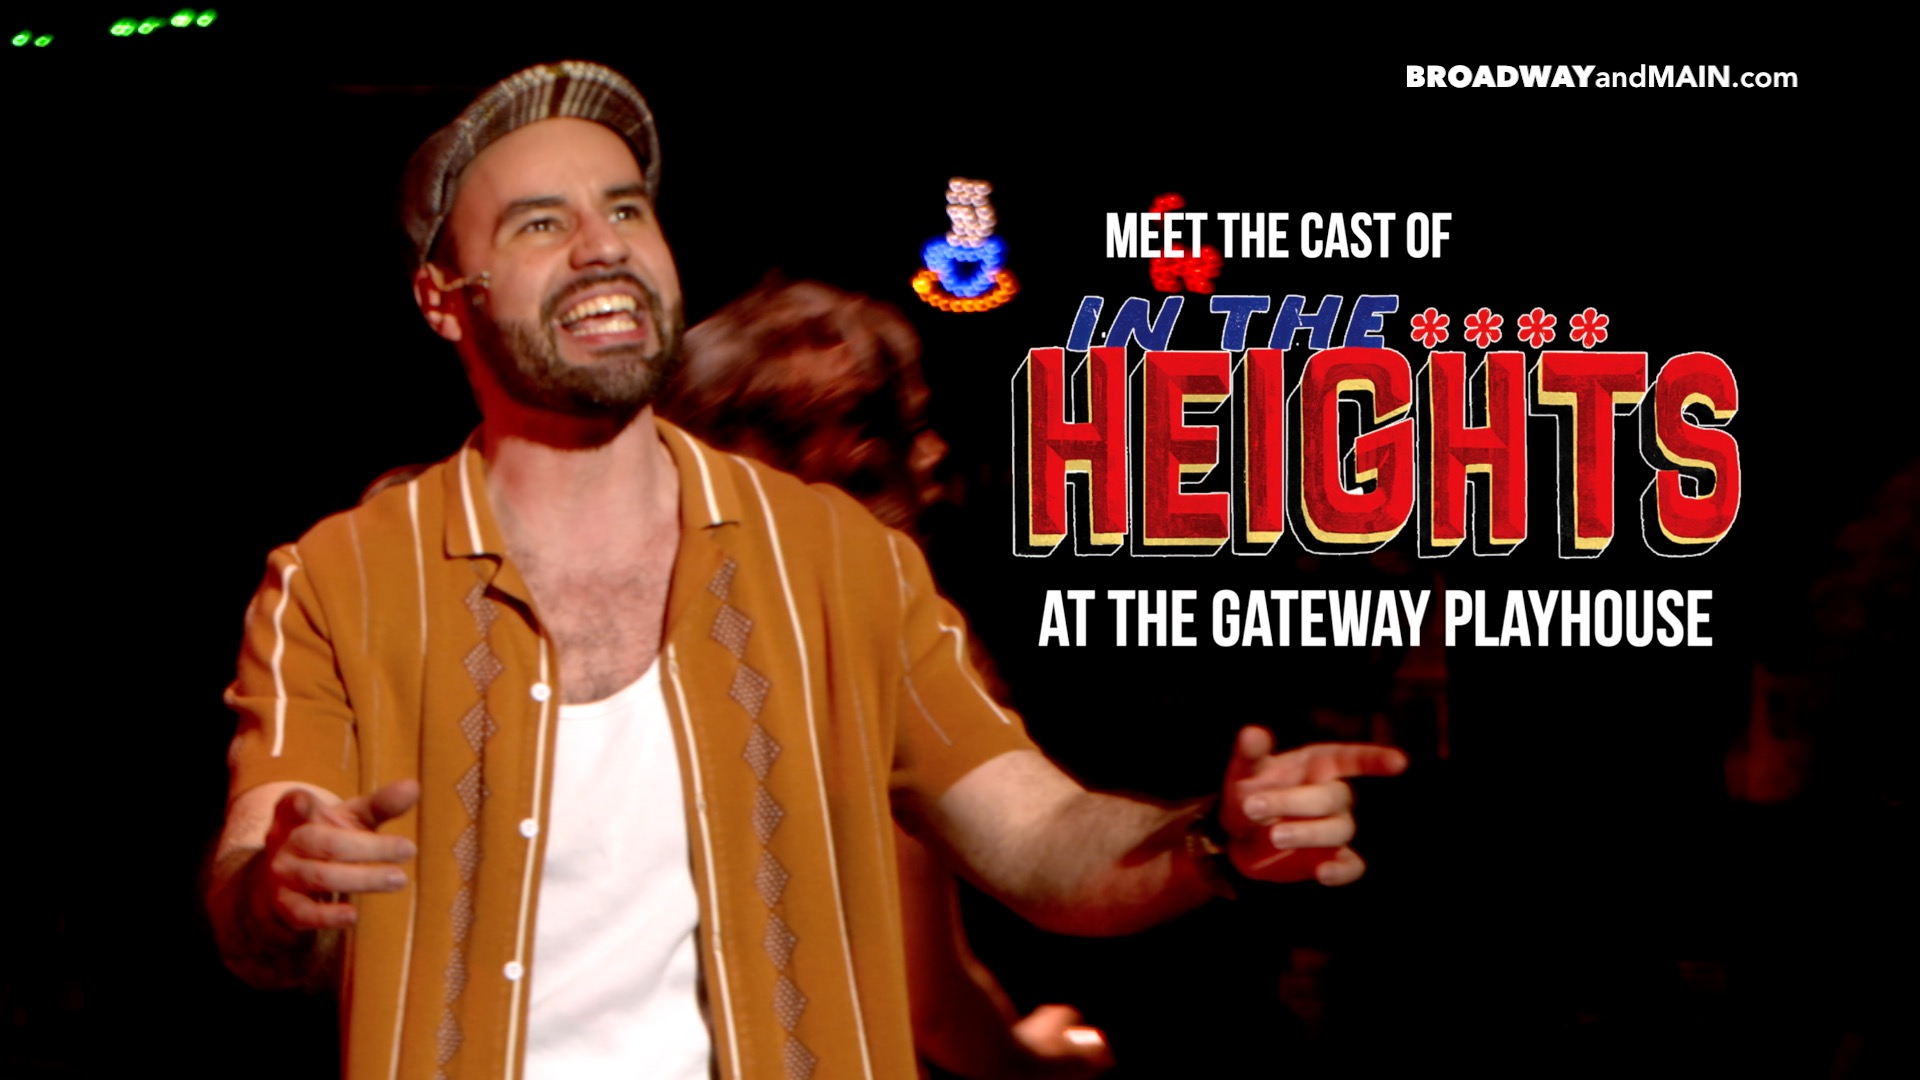 Meet The Cast of In The Heights at the Gateway